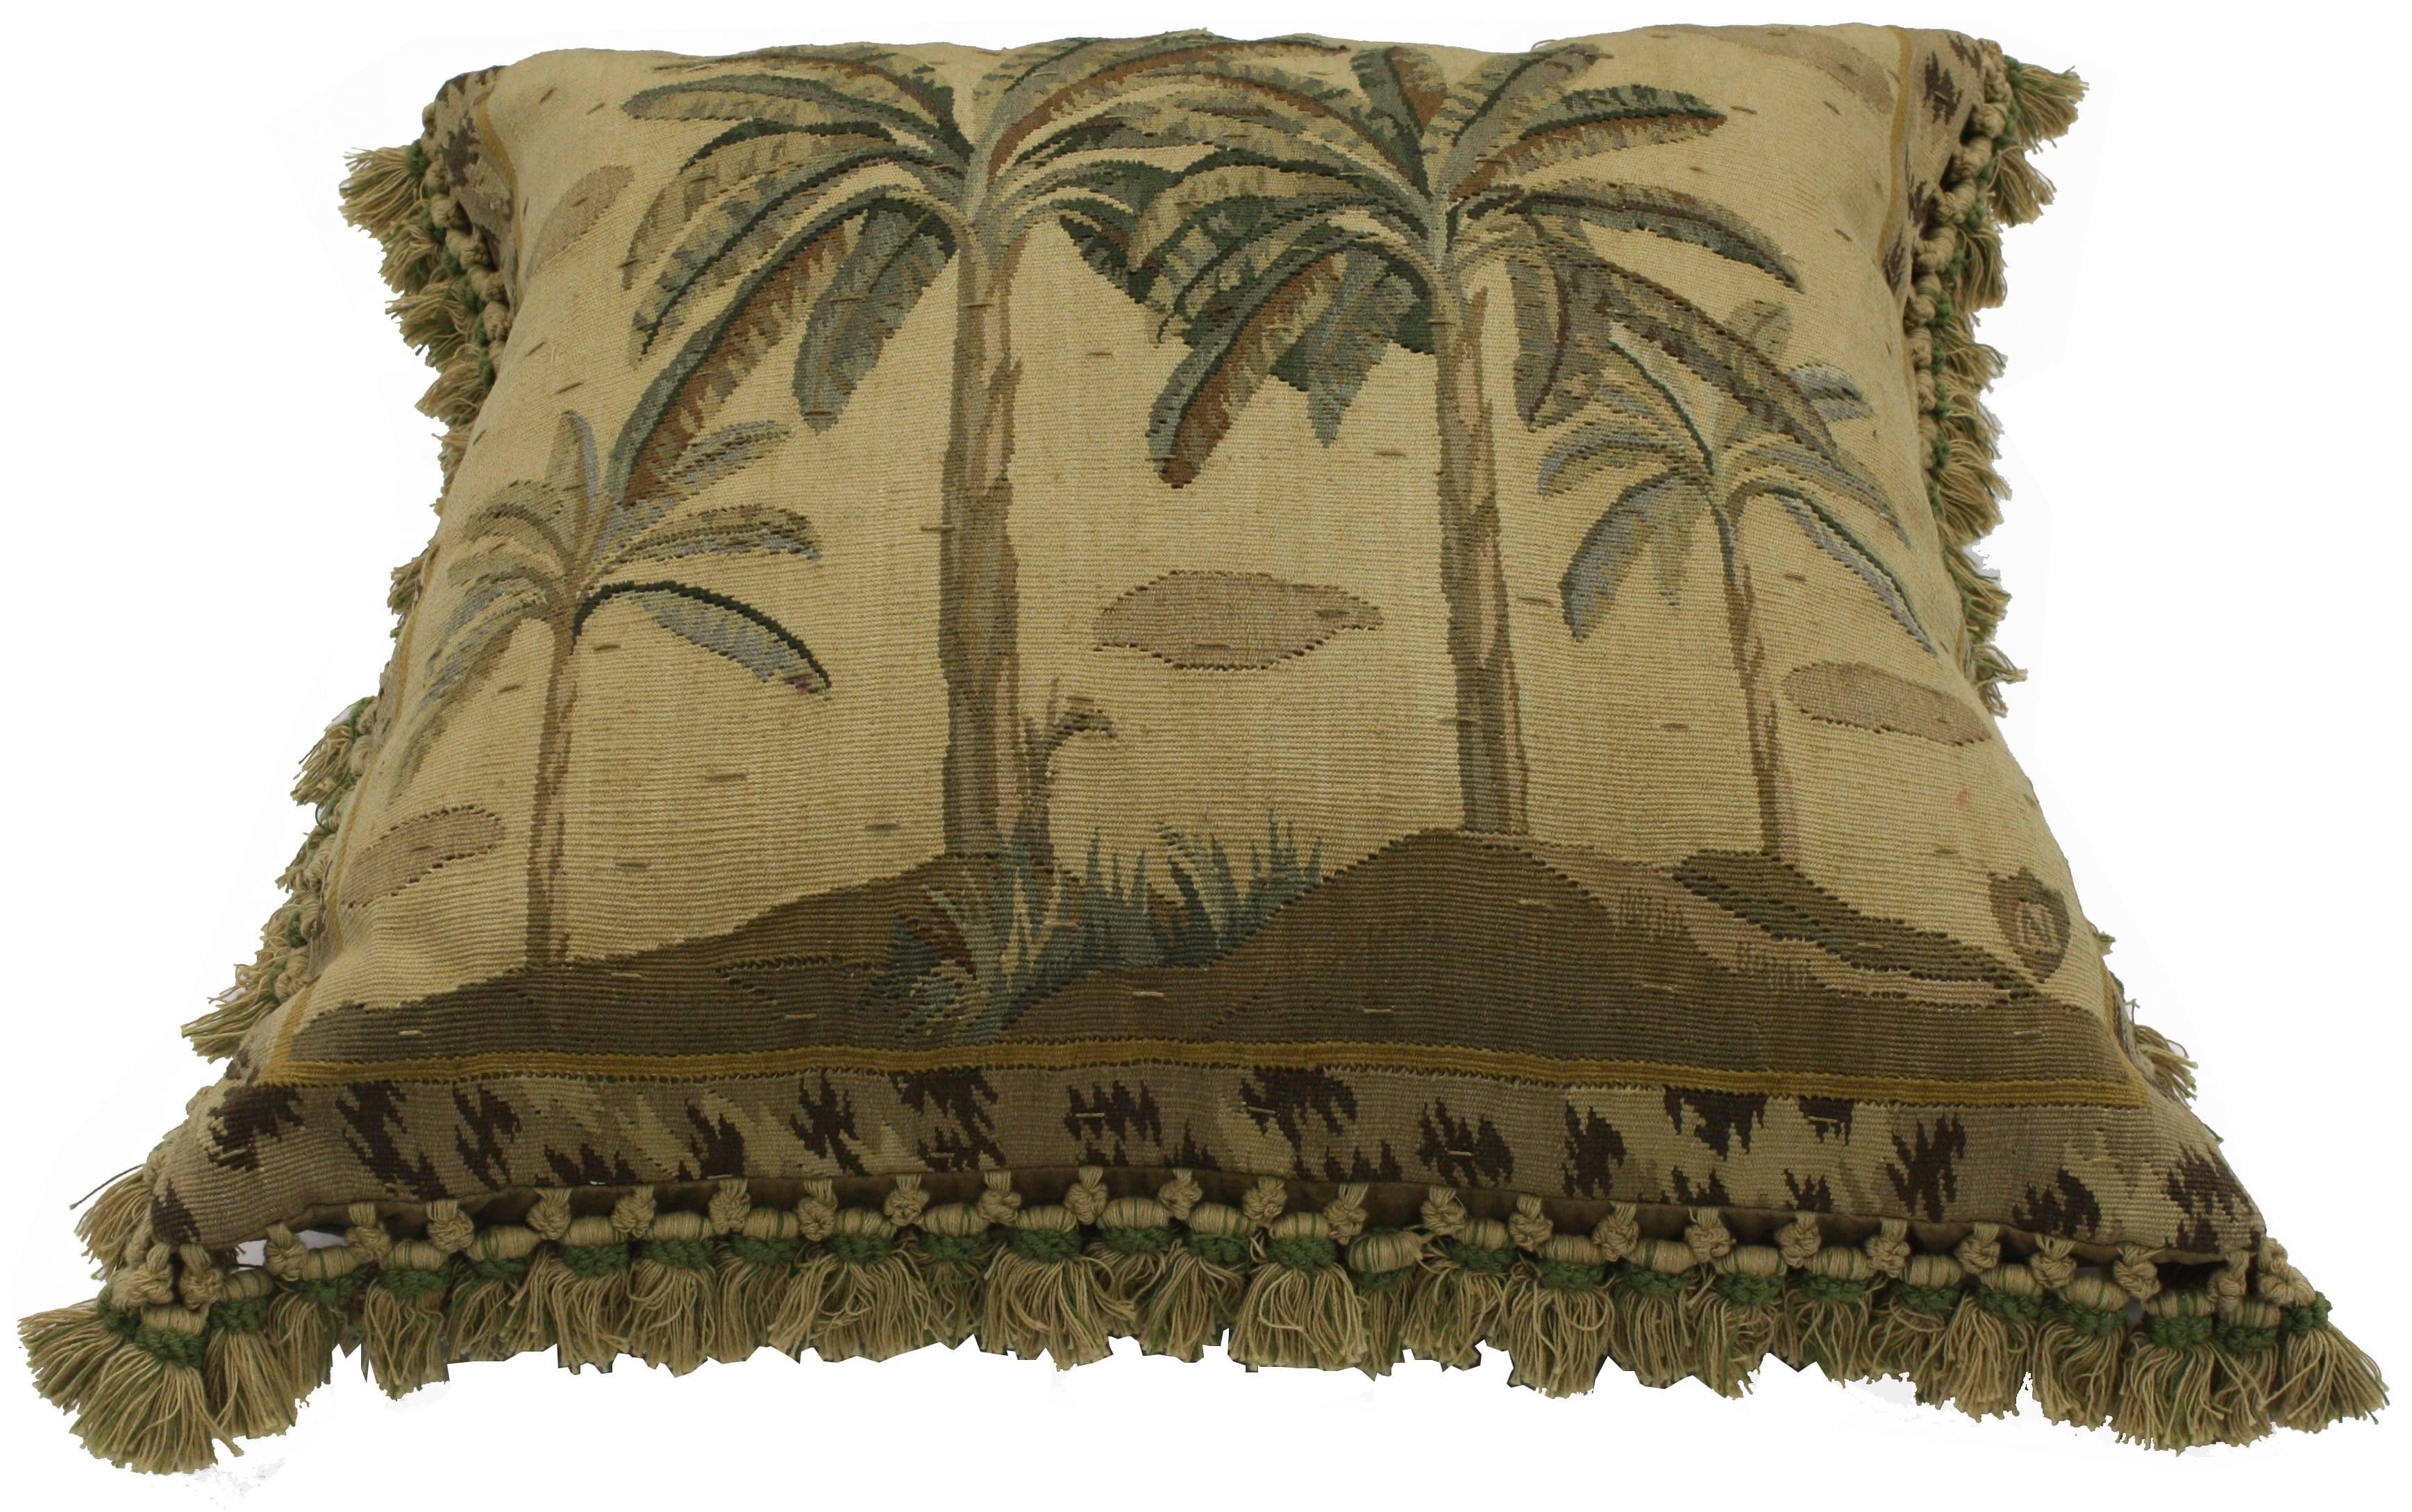 Add a tropical and exotic aesthetic to your space with this late 19th century antique European tapestry pillow with French Passementerie fringe. A decorative landscape scene of palm trees rendered in rich and refined colors ranging variegated shades